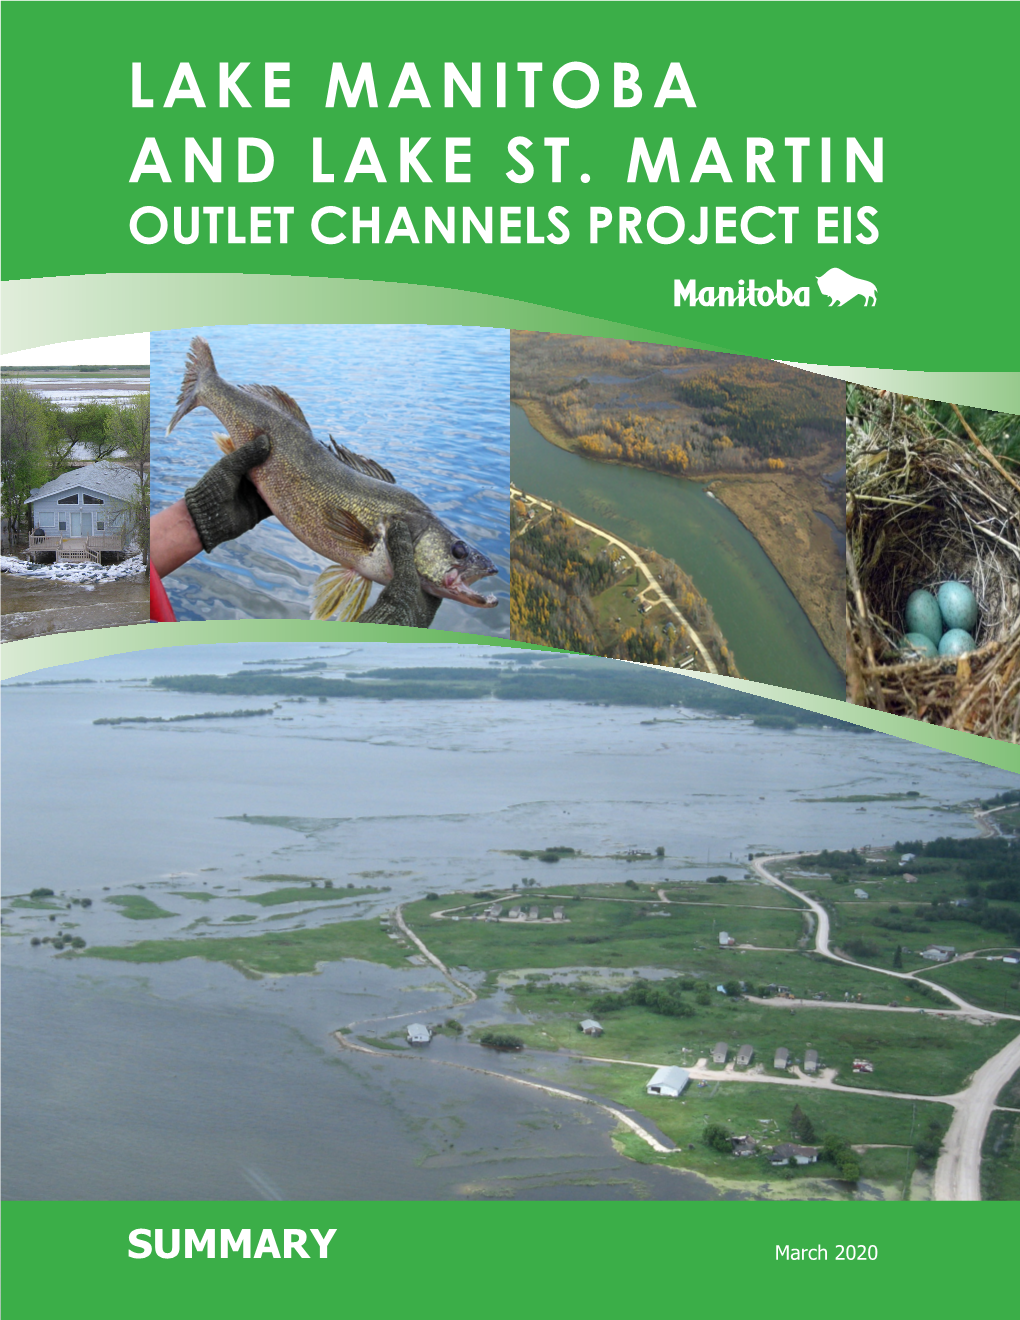 Lake Manitoba and Lake St. Martin Outlet Channels Project Eis